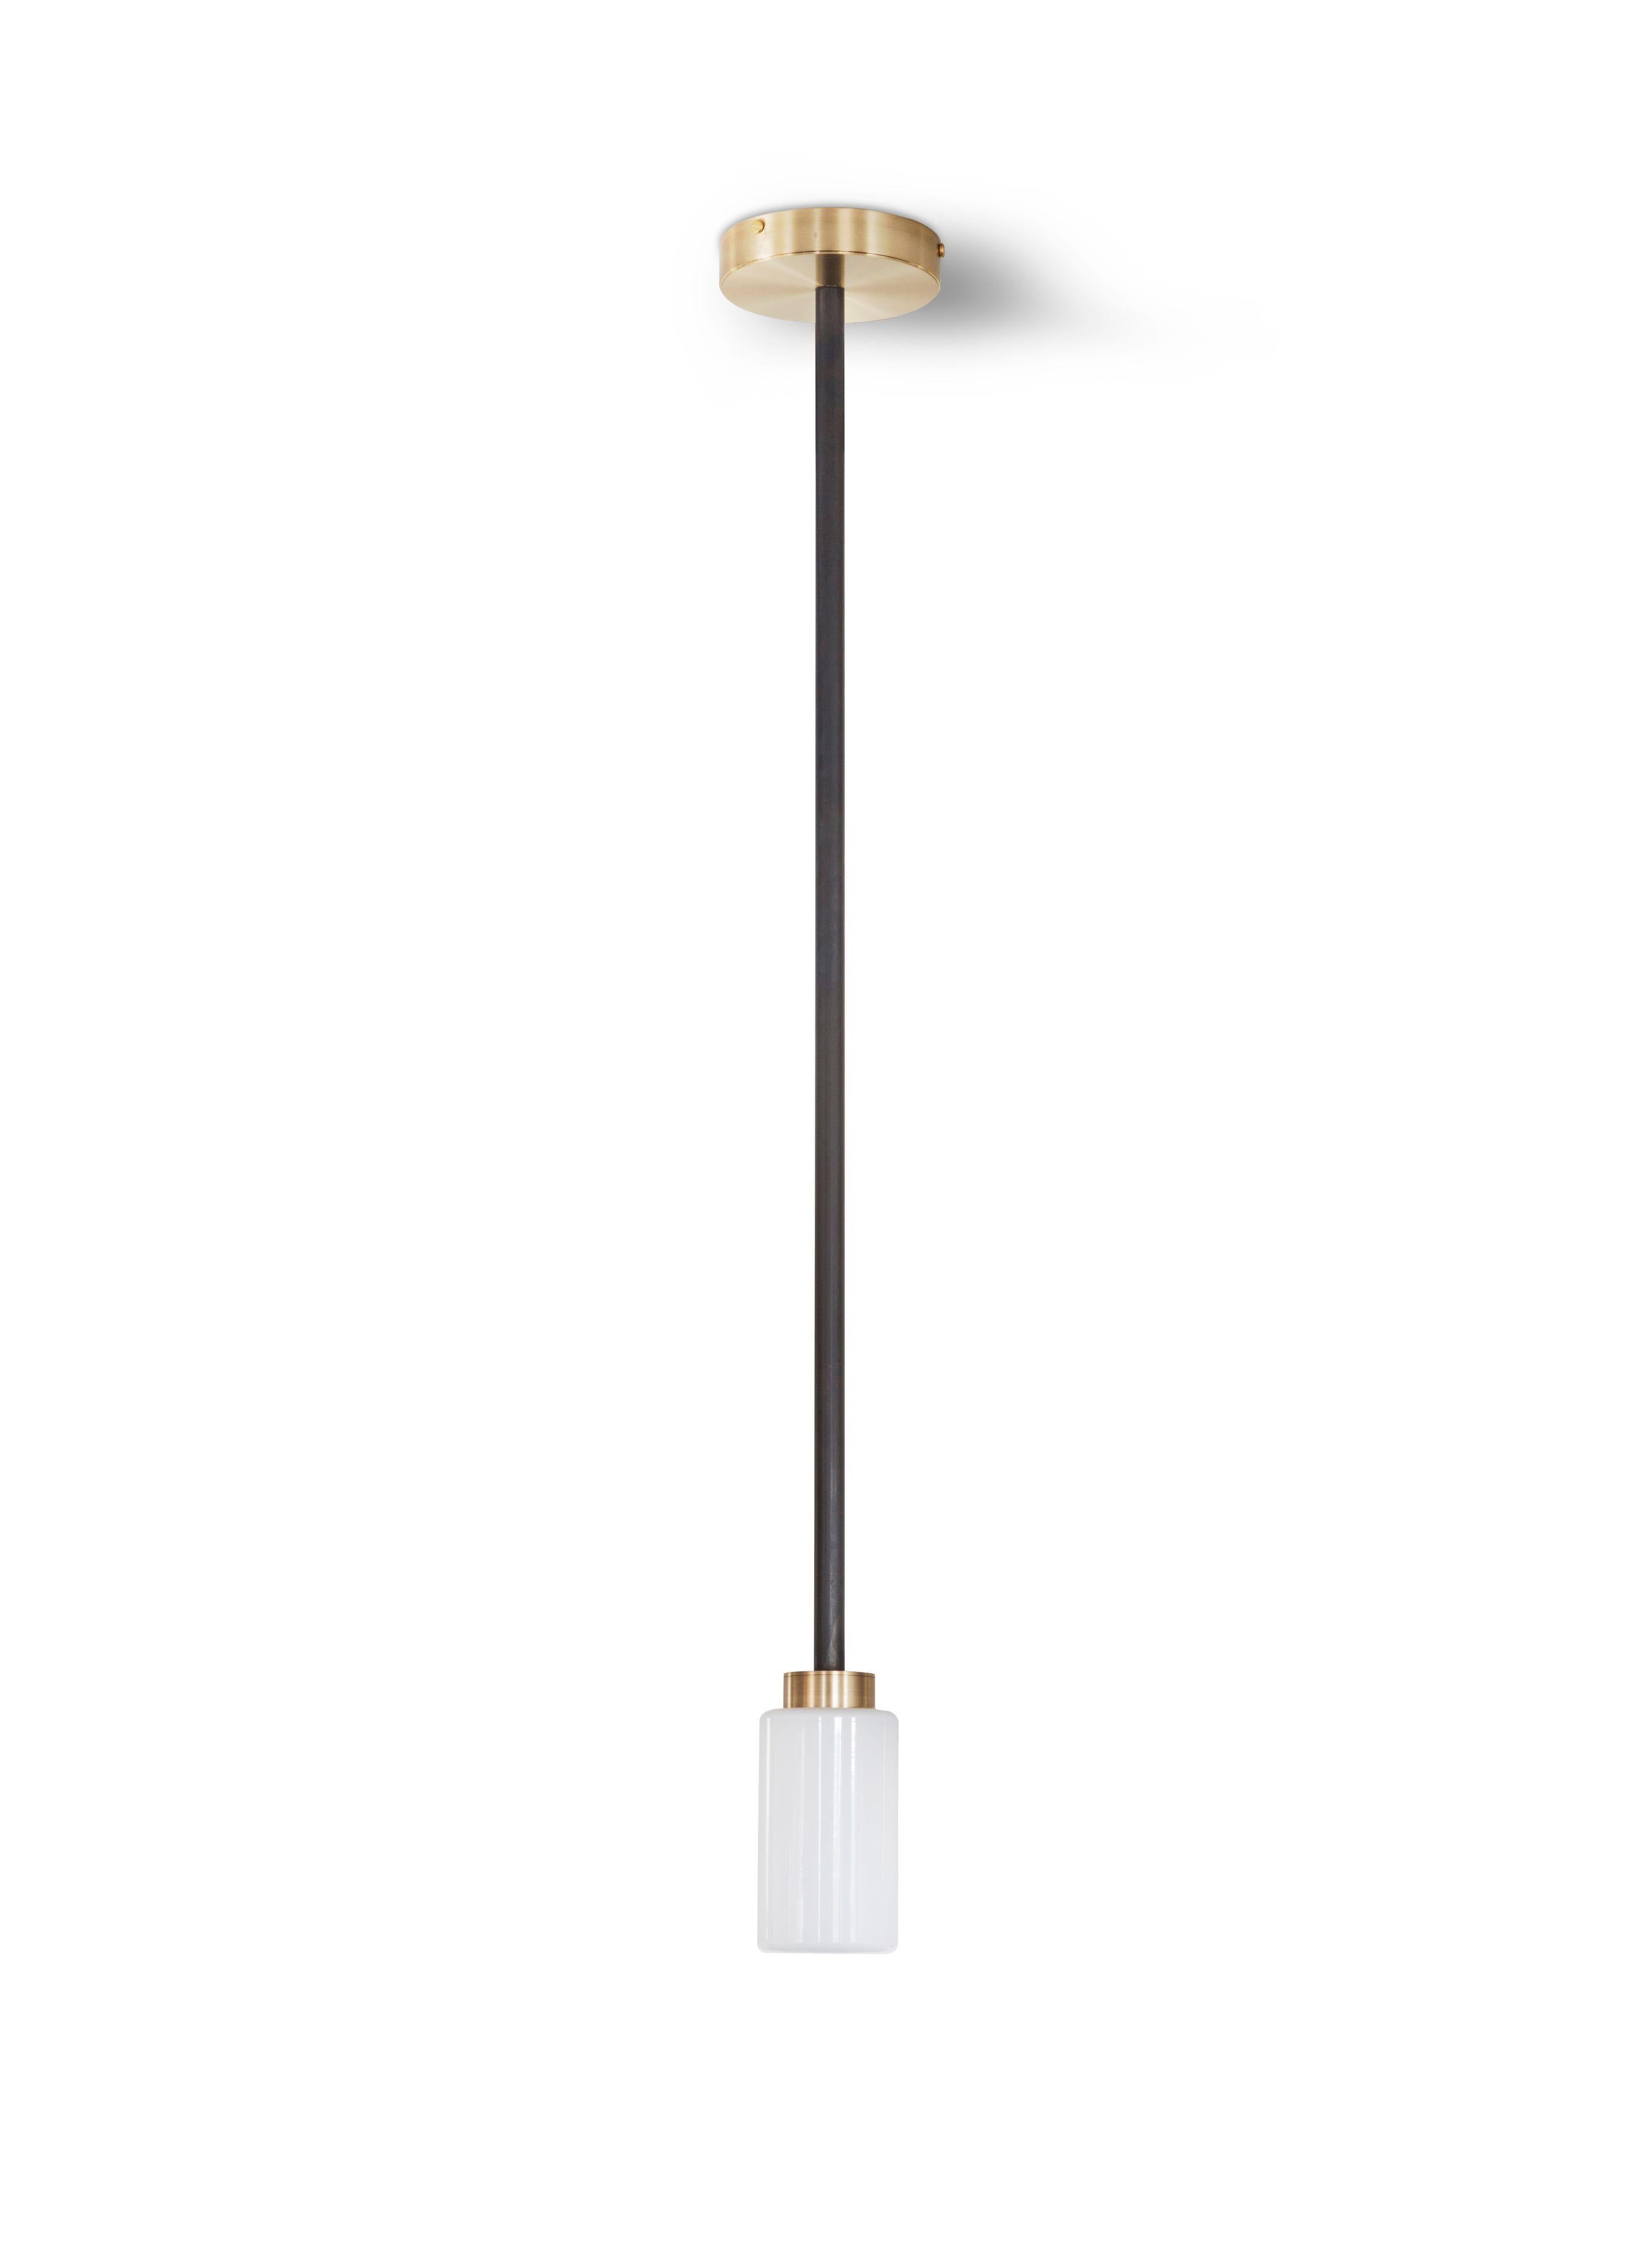 Opal Farol pendant by Bert Frank
Dimensions: H 14 x D 7 cm
Materials: Brass, bronze and opal

Available finishes: Bronzed brass and black brass
All our lamps can be wired according to each country. If sold to the USA it will be wired for the